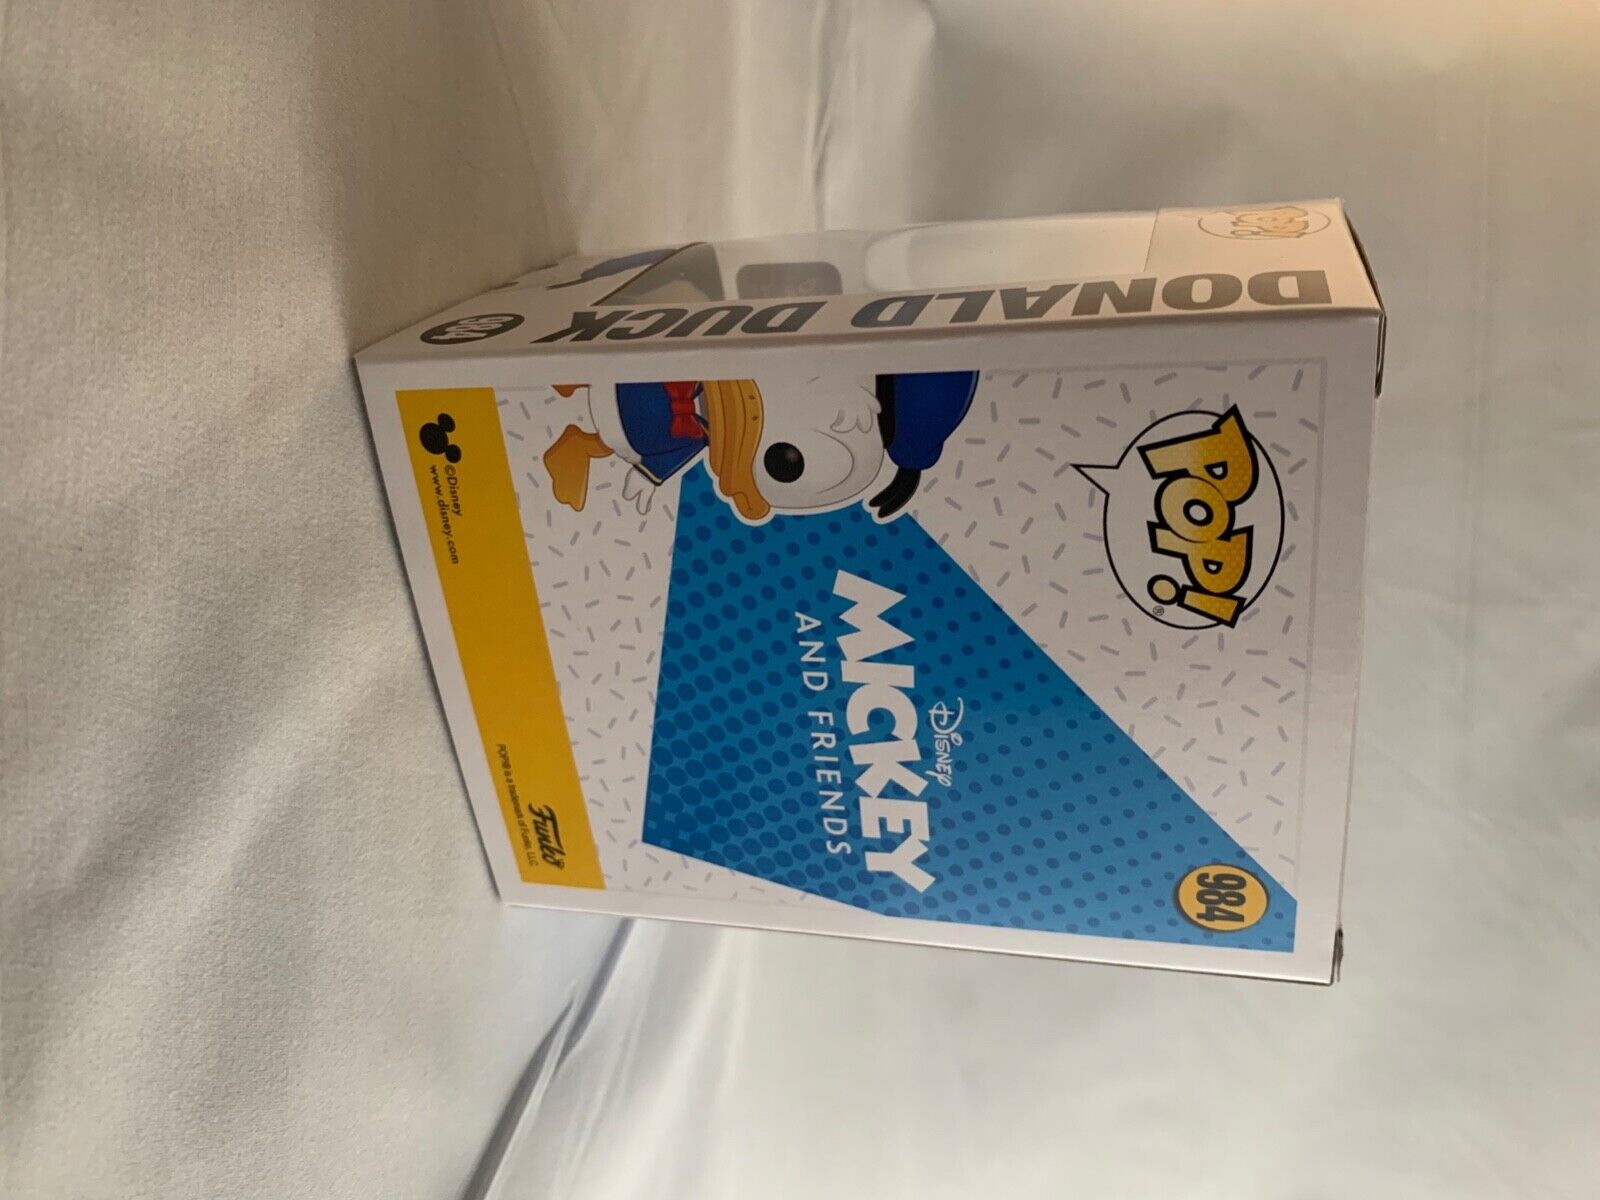 funko pop donald duck 984 hollywood exclusive “NEW” 